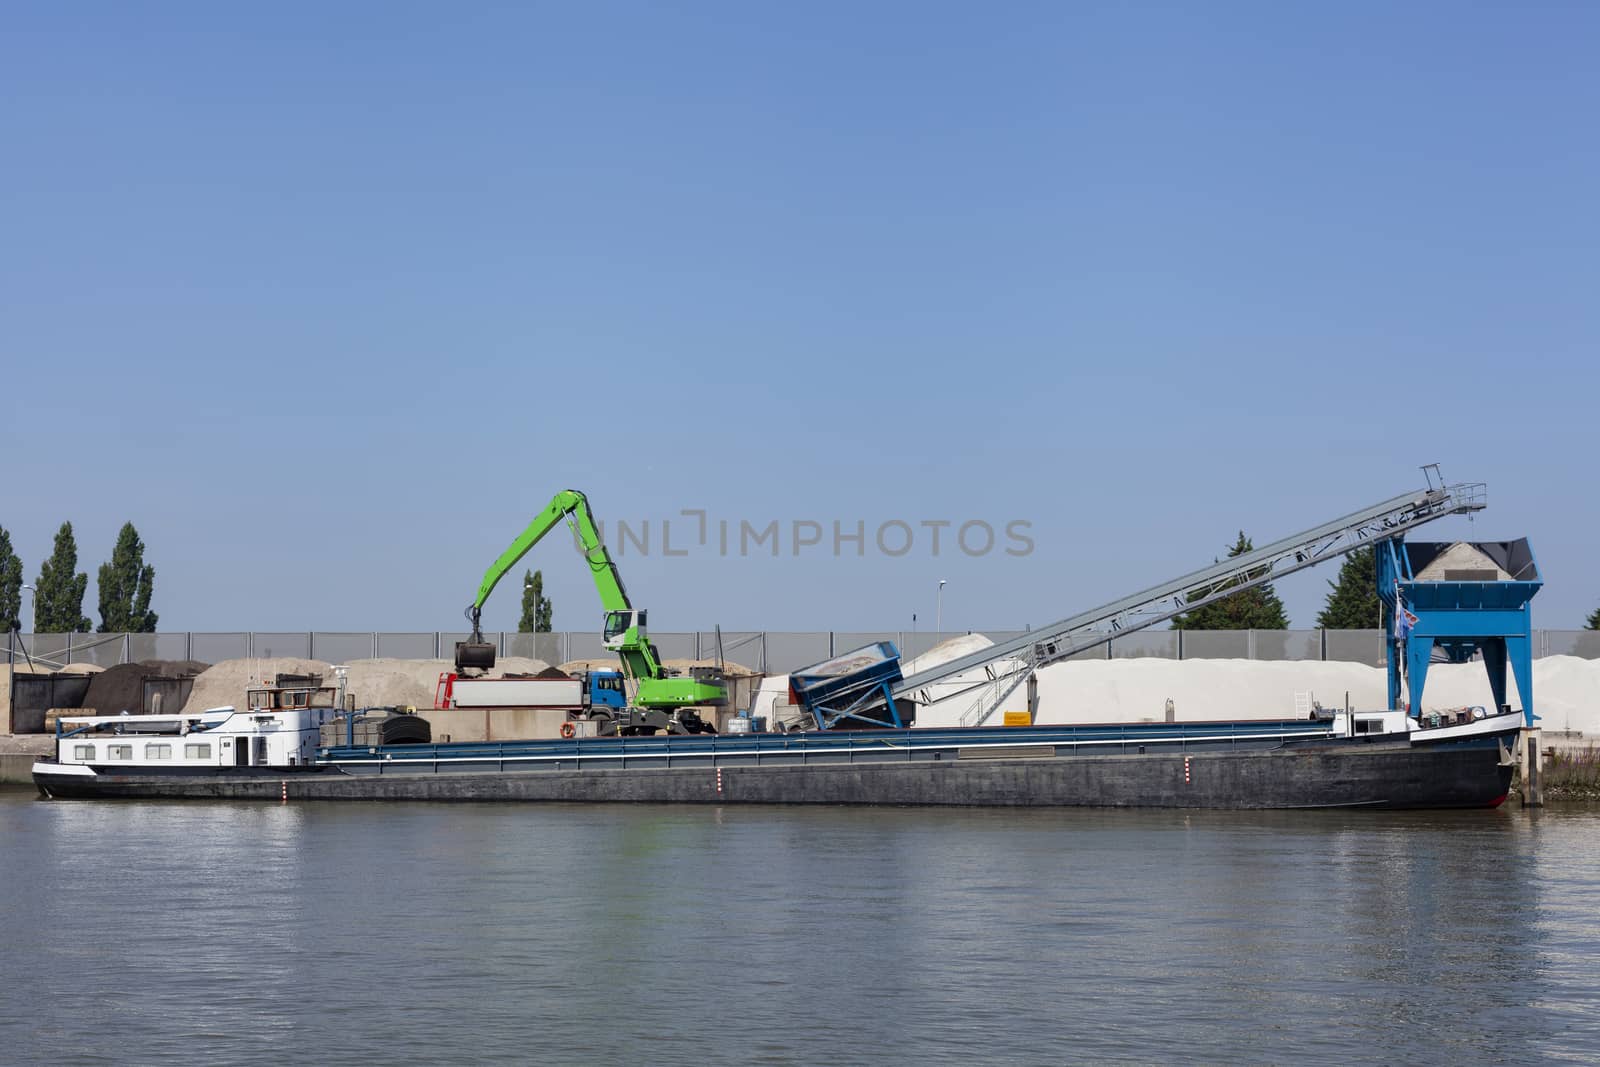 Loading barge with sand and rubble on a small berth. Freight tra by Tjeerdkruse